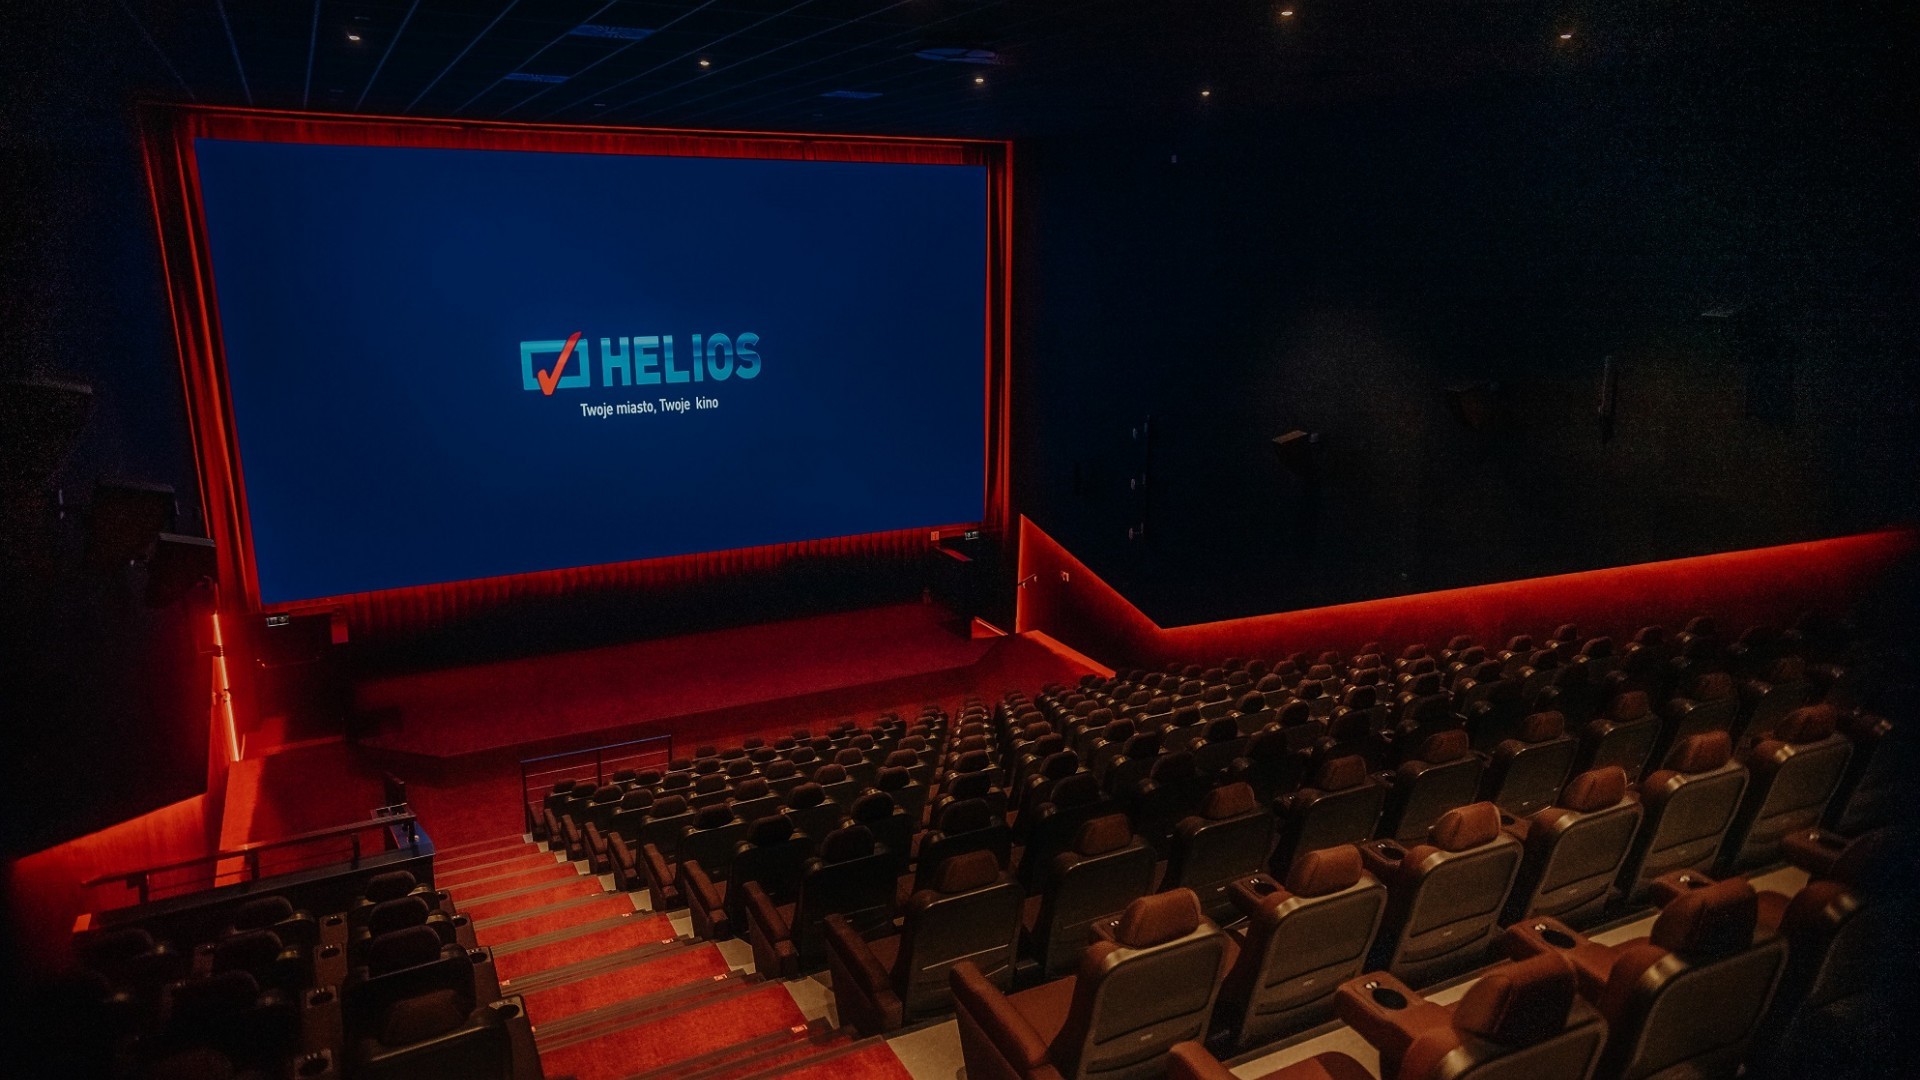 Helios in the Ostrovia Gallery invites to screenings – opening of the 51st cinema of the network already on Friday in Ostrów Wielkopolski